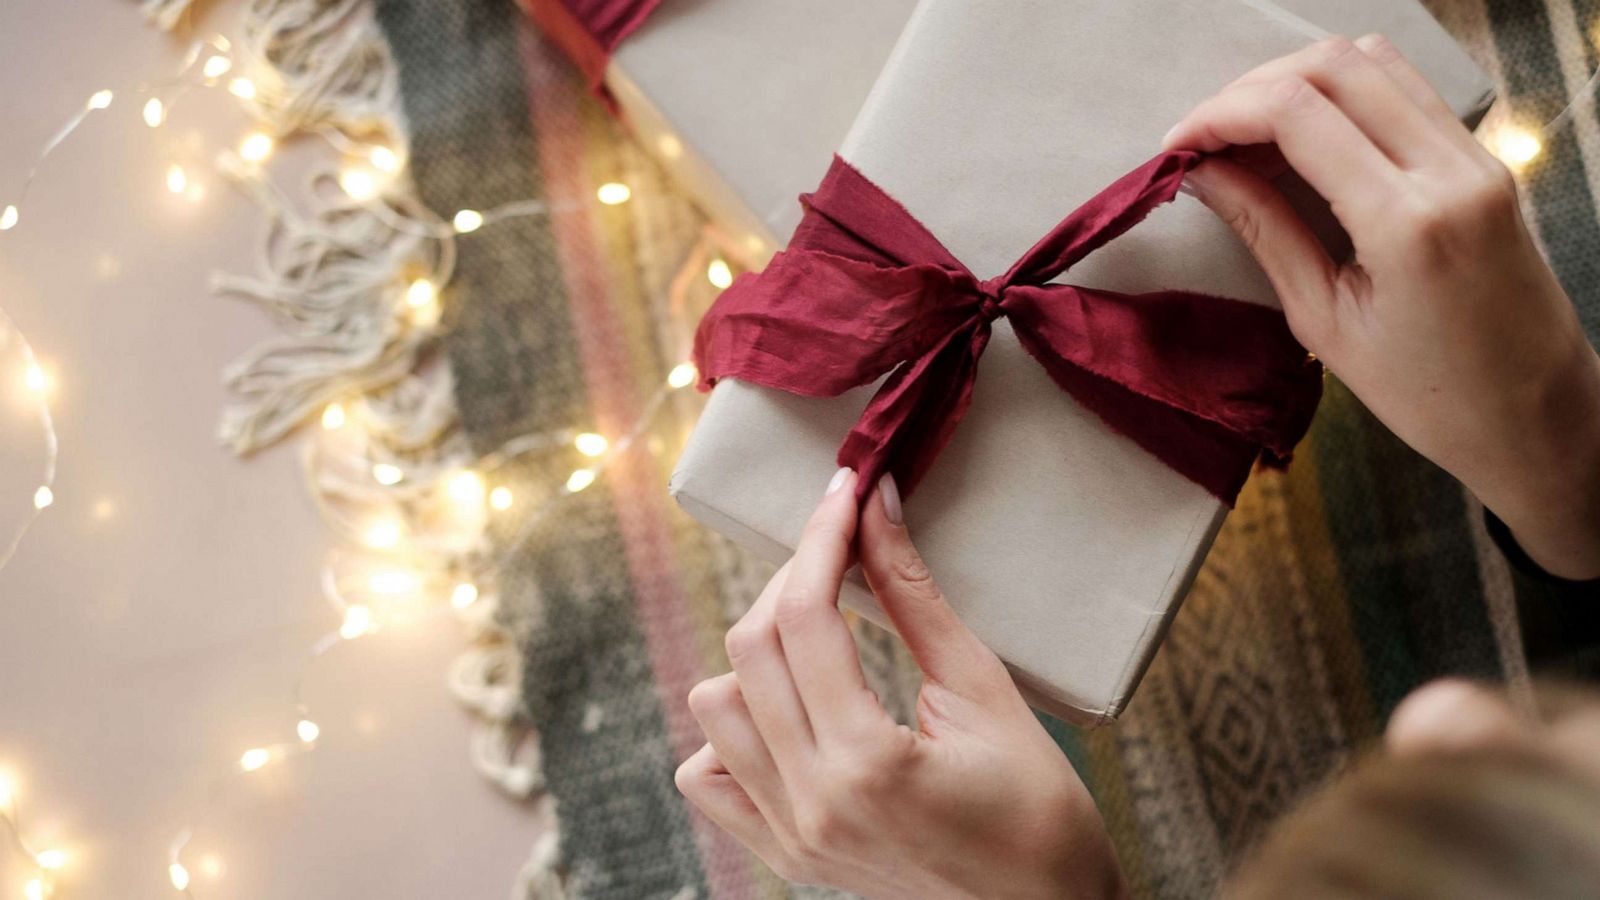 25 gift cards that are great last-minute ideas - Good Morning America